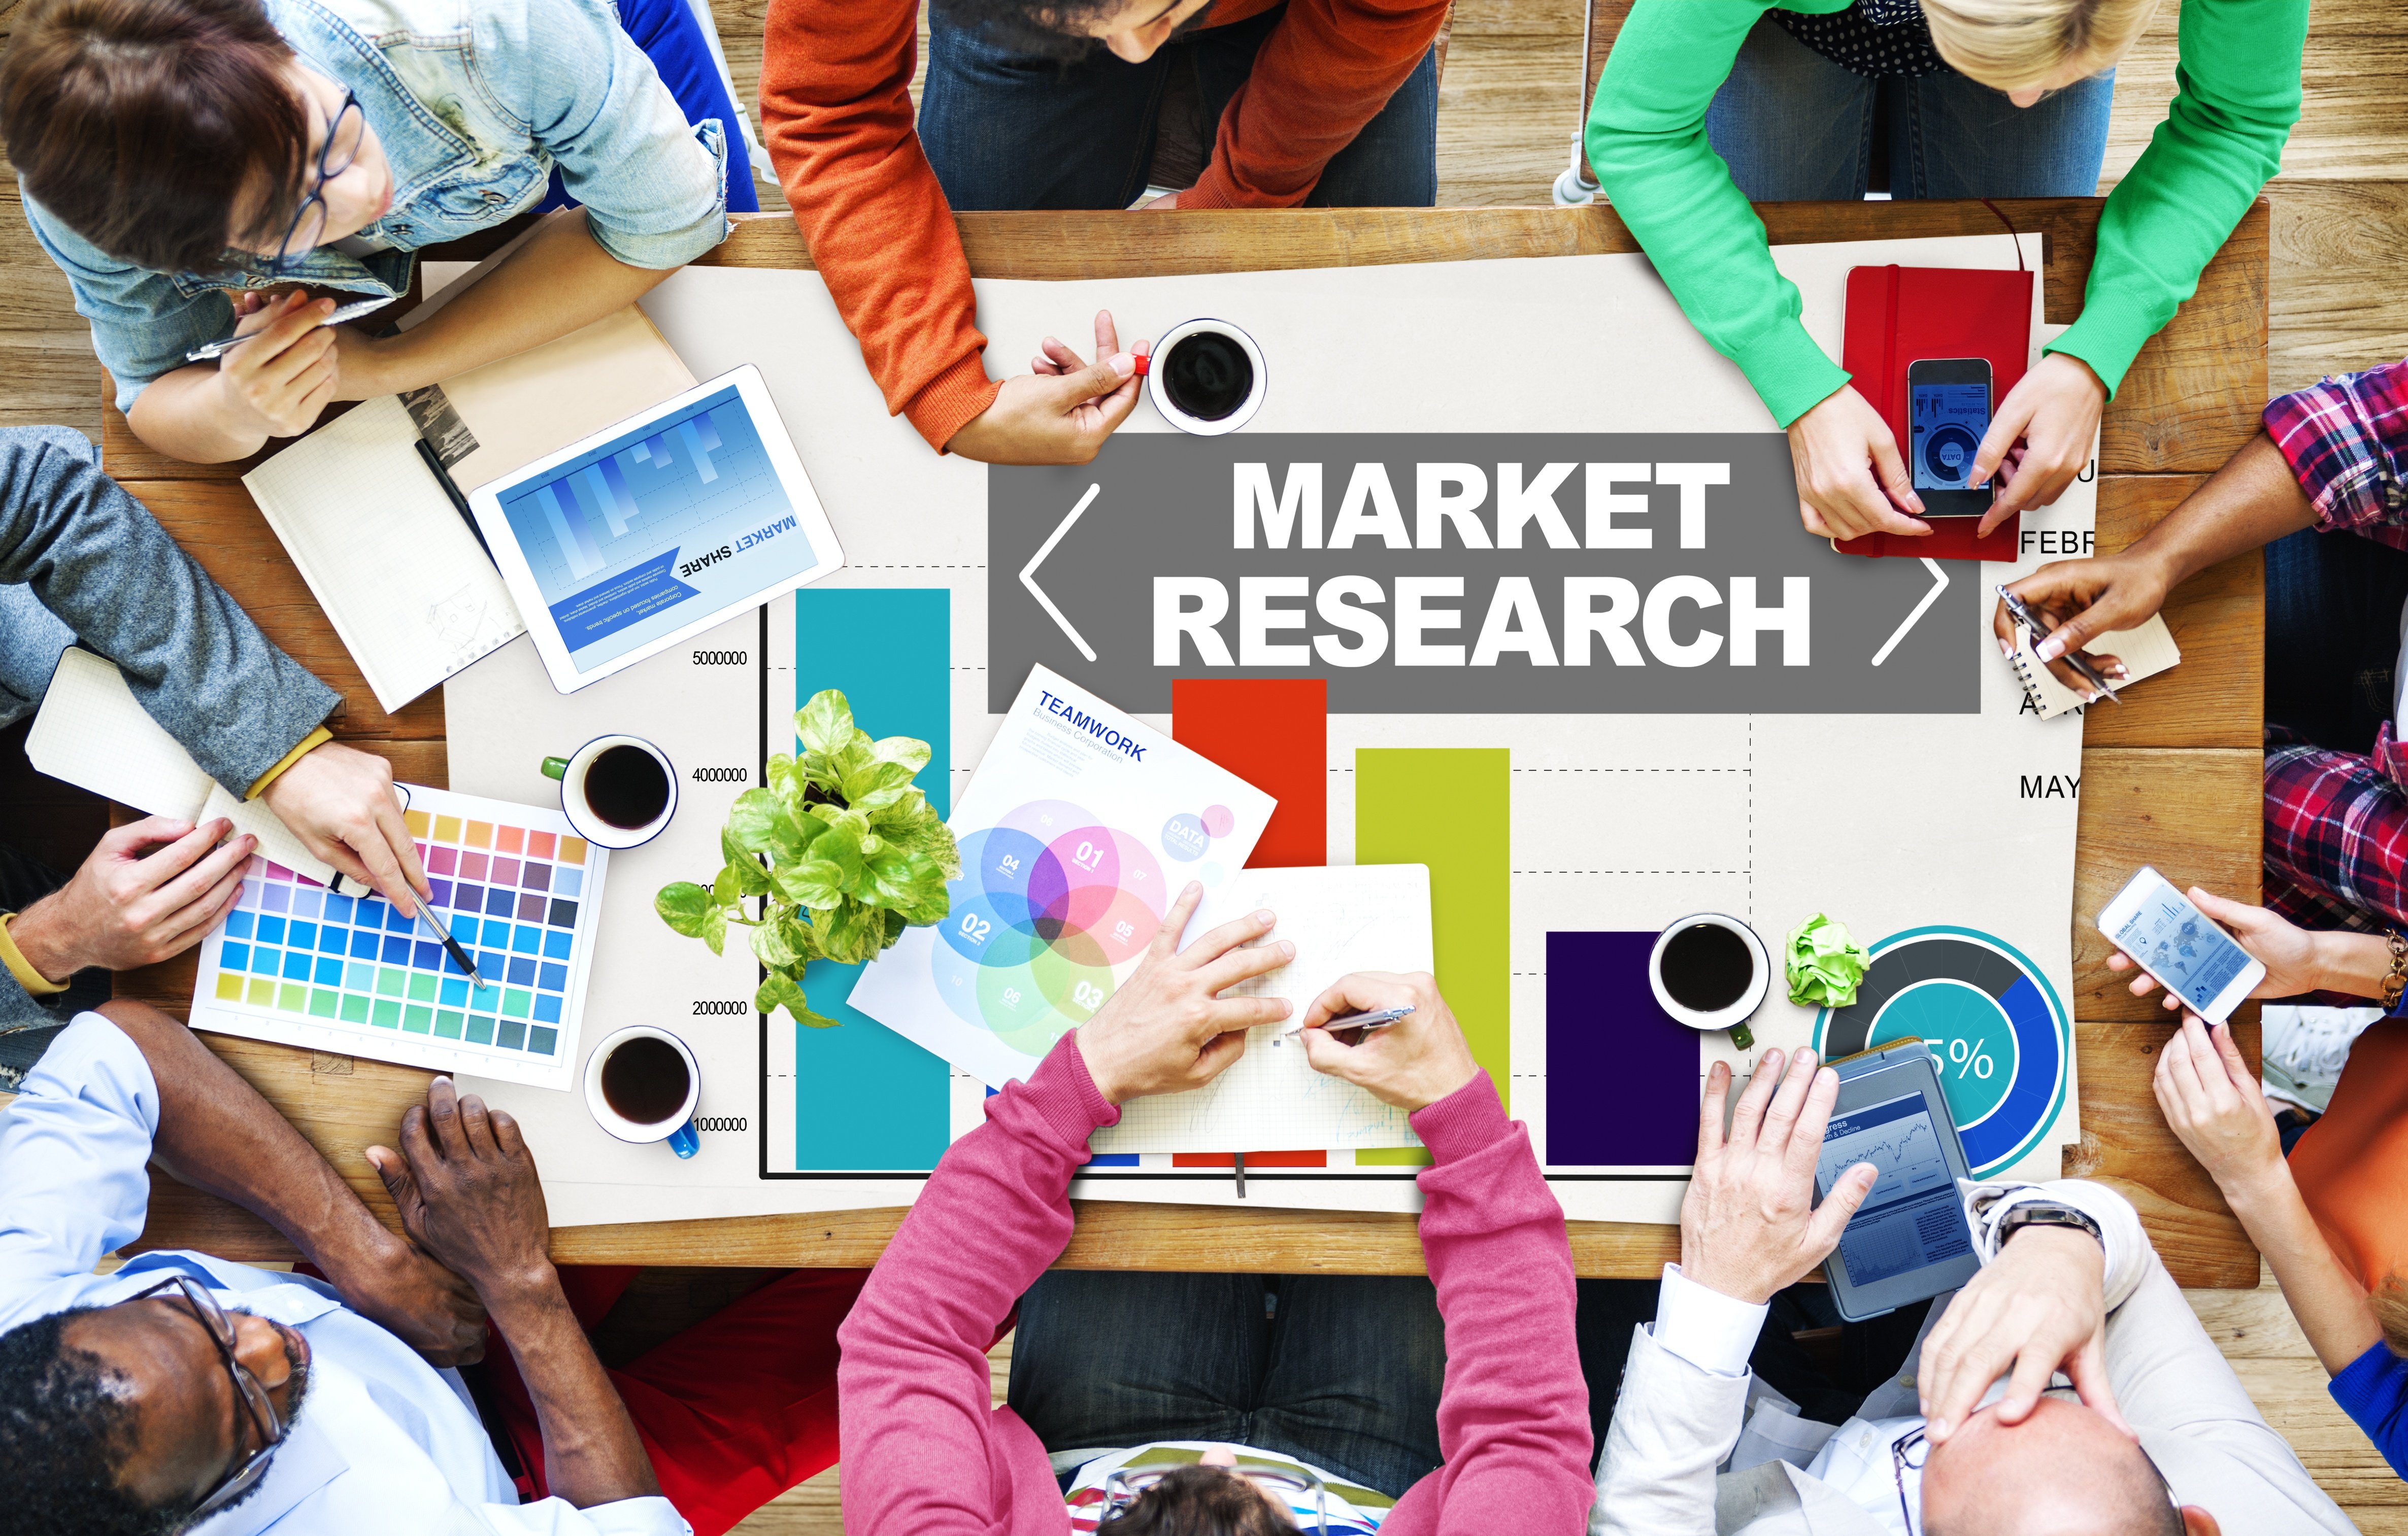 How Market Research Has Changed Over Time